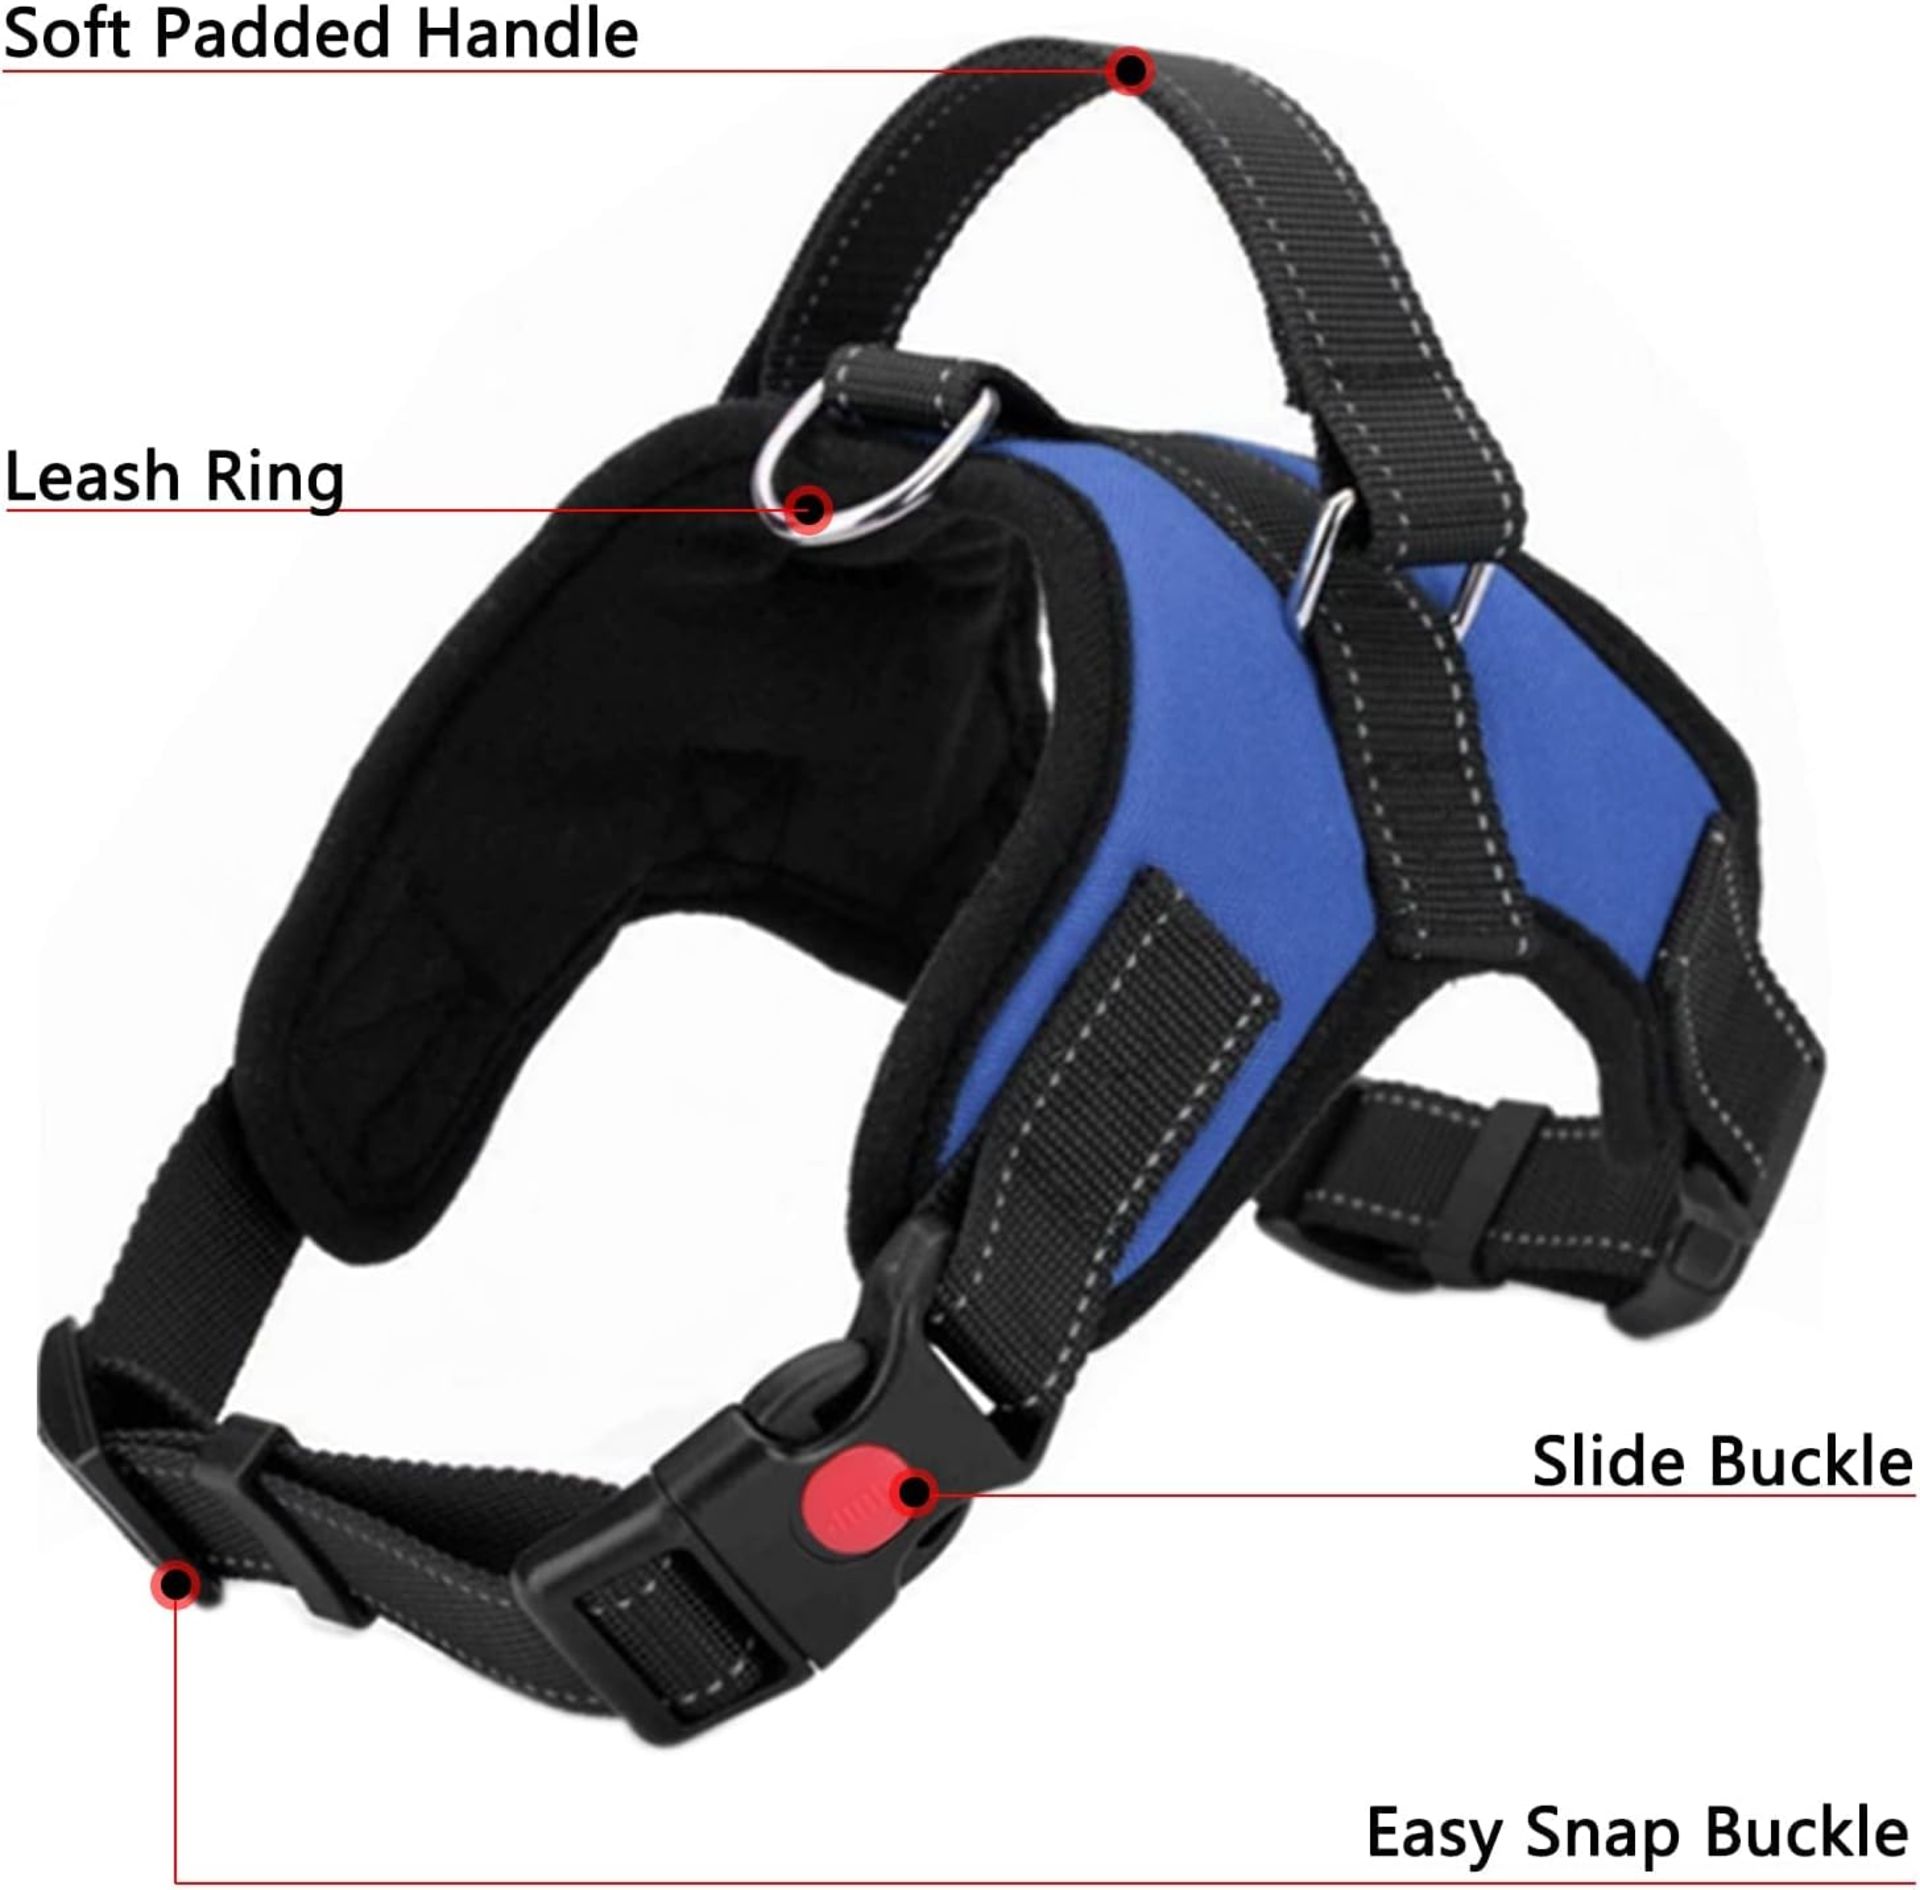 300 X JOBLOT DOG HARNESSES STRONG MIXED SIZES AND COLORS